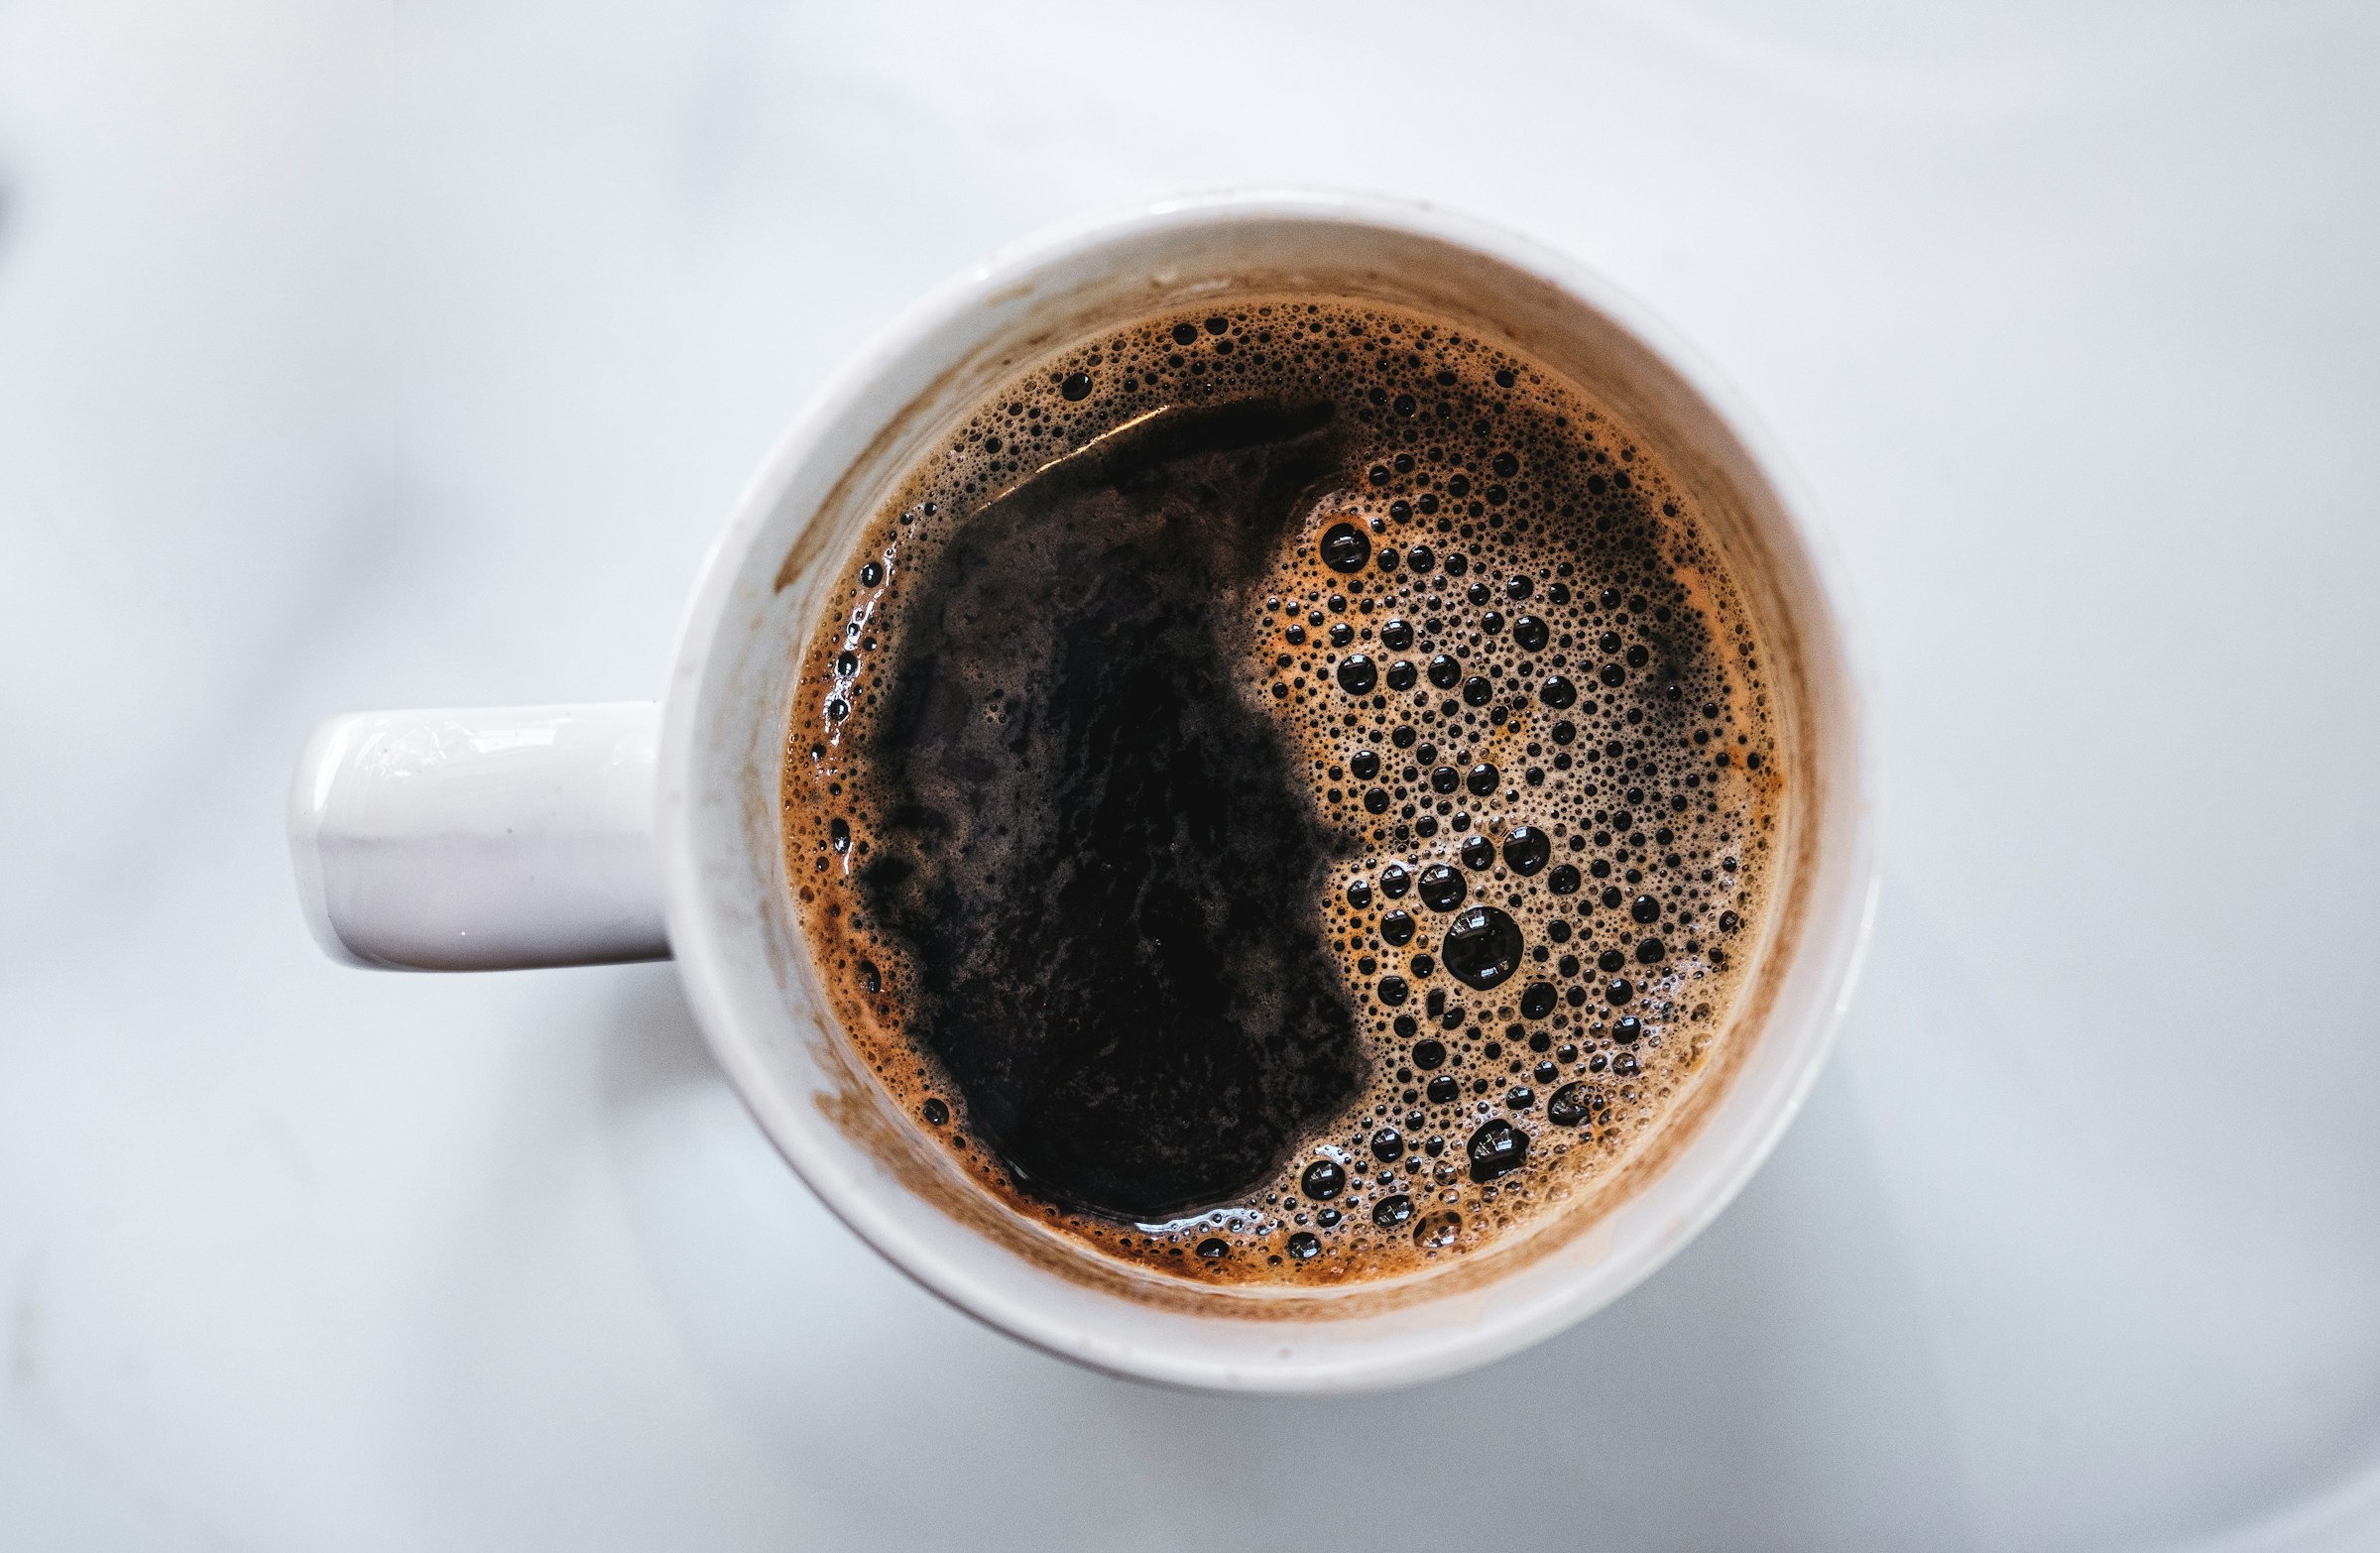 A cup of coffee | Source: Unsplash